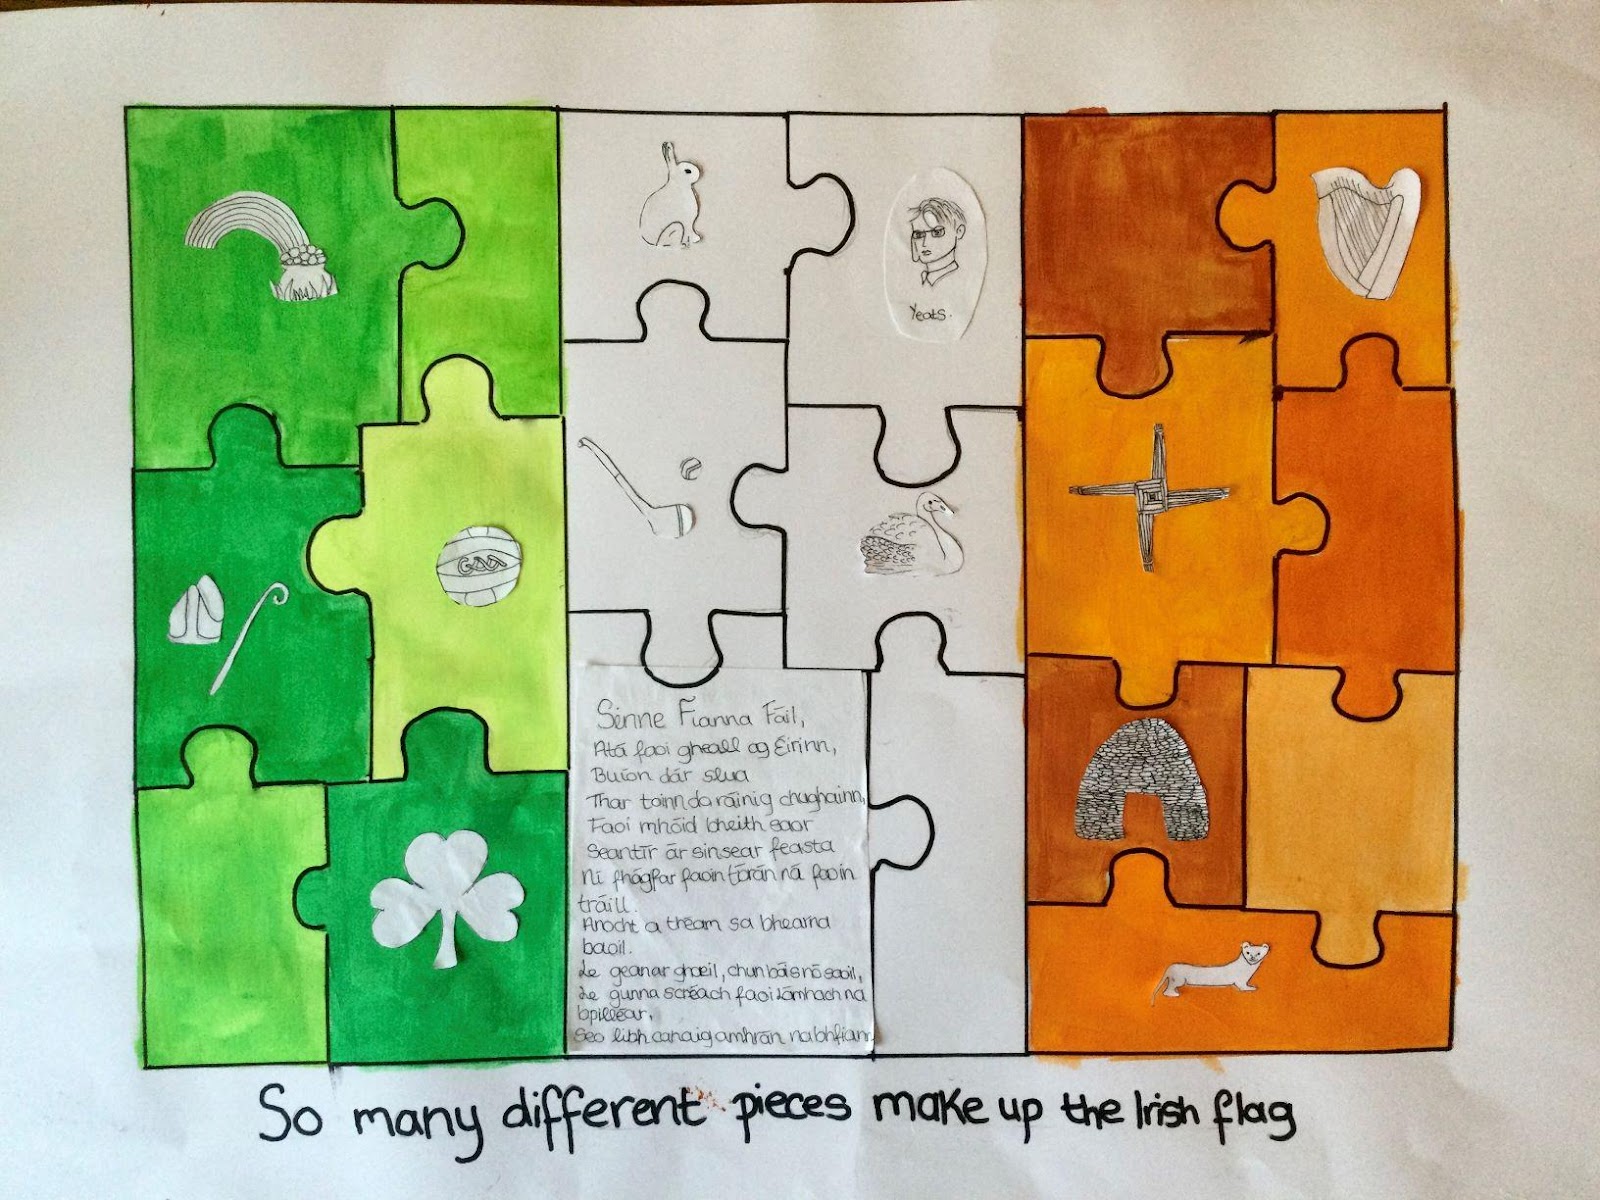 A puzzle with different colored pieces

Description automatically generated